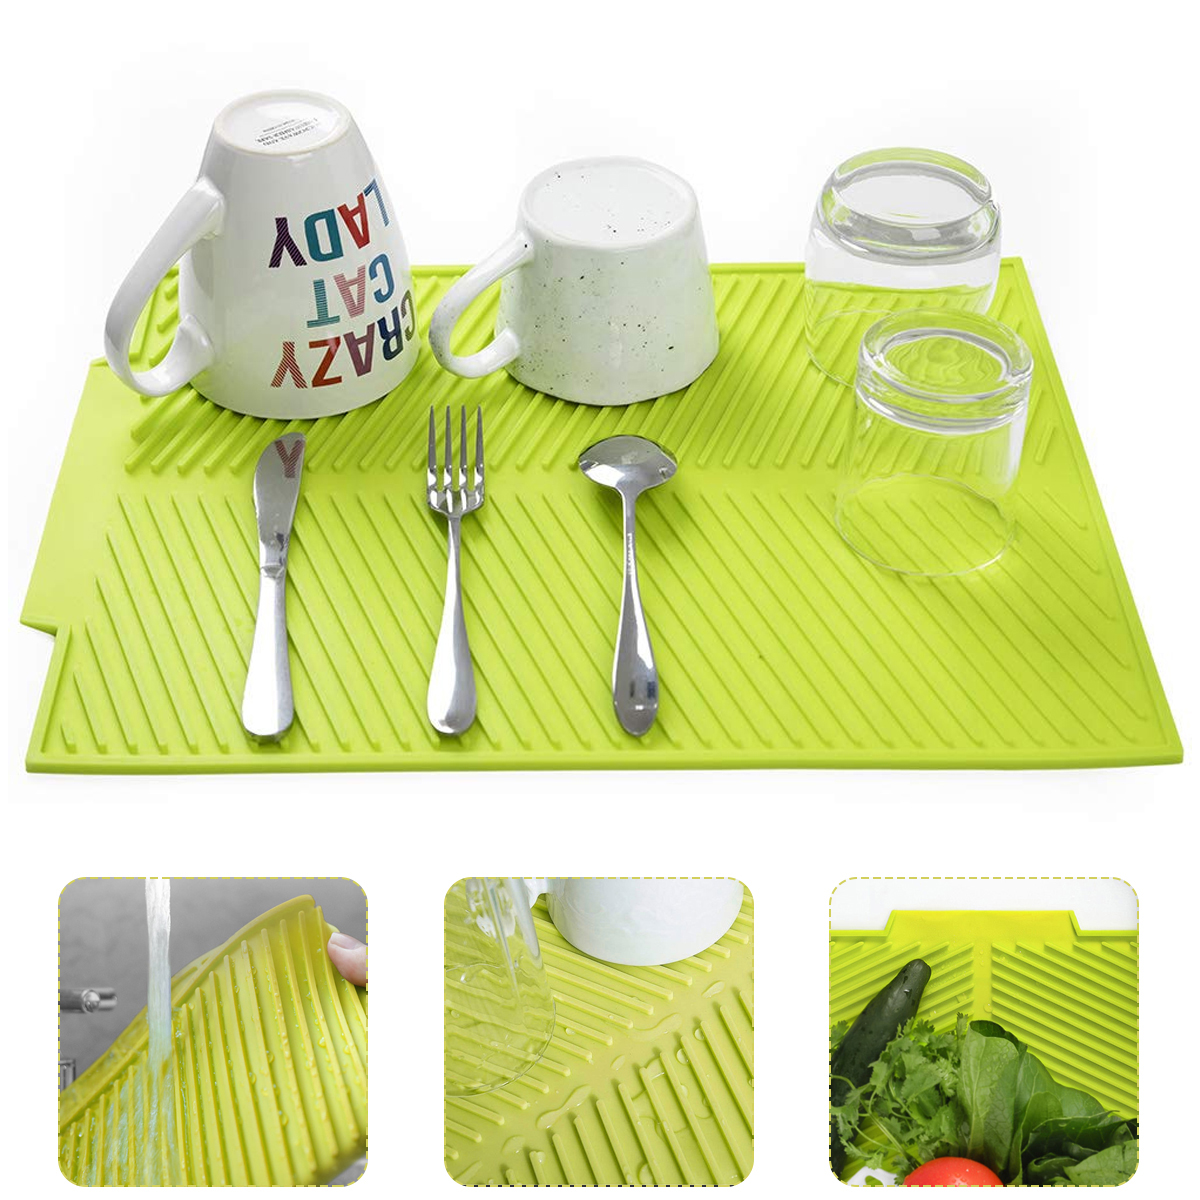 

Silicone Dish Drying Mat Dish Cup Mat for Kitchen Waterproof Countertop Mat Non Slip Heat Resistant BPA Free Dish Washer